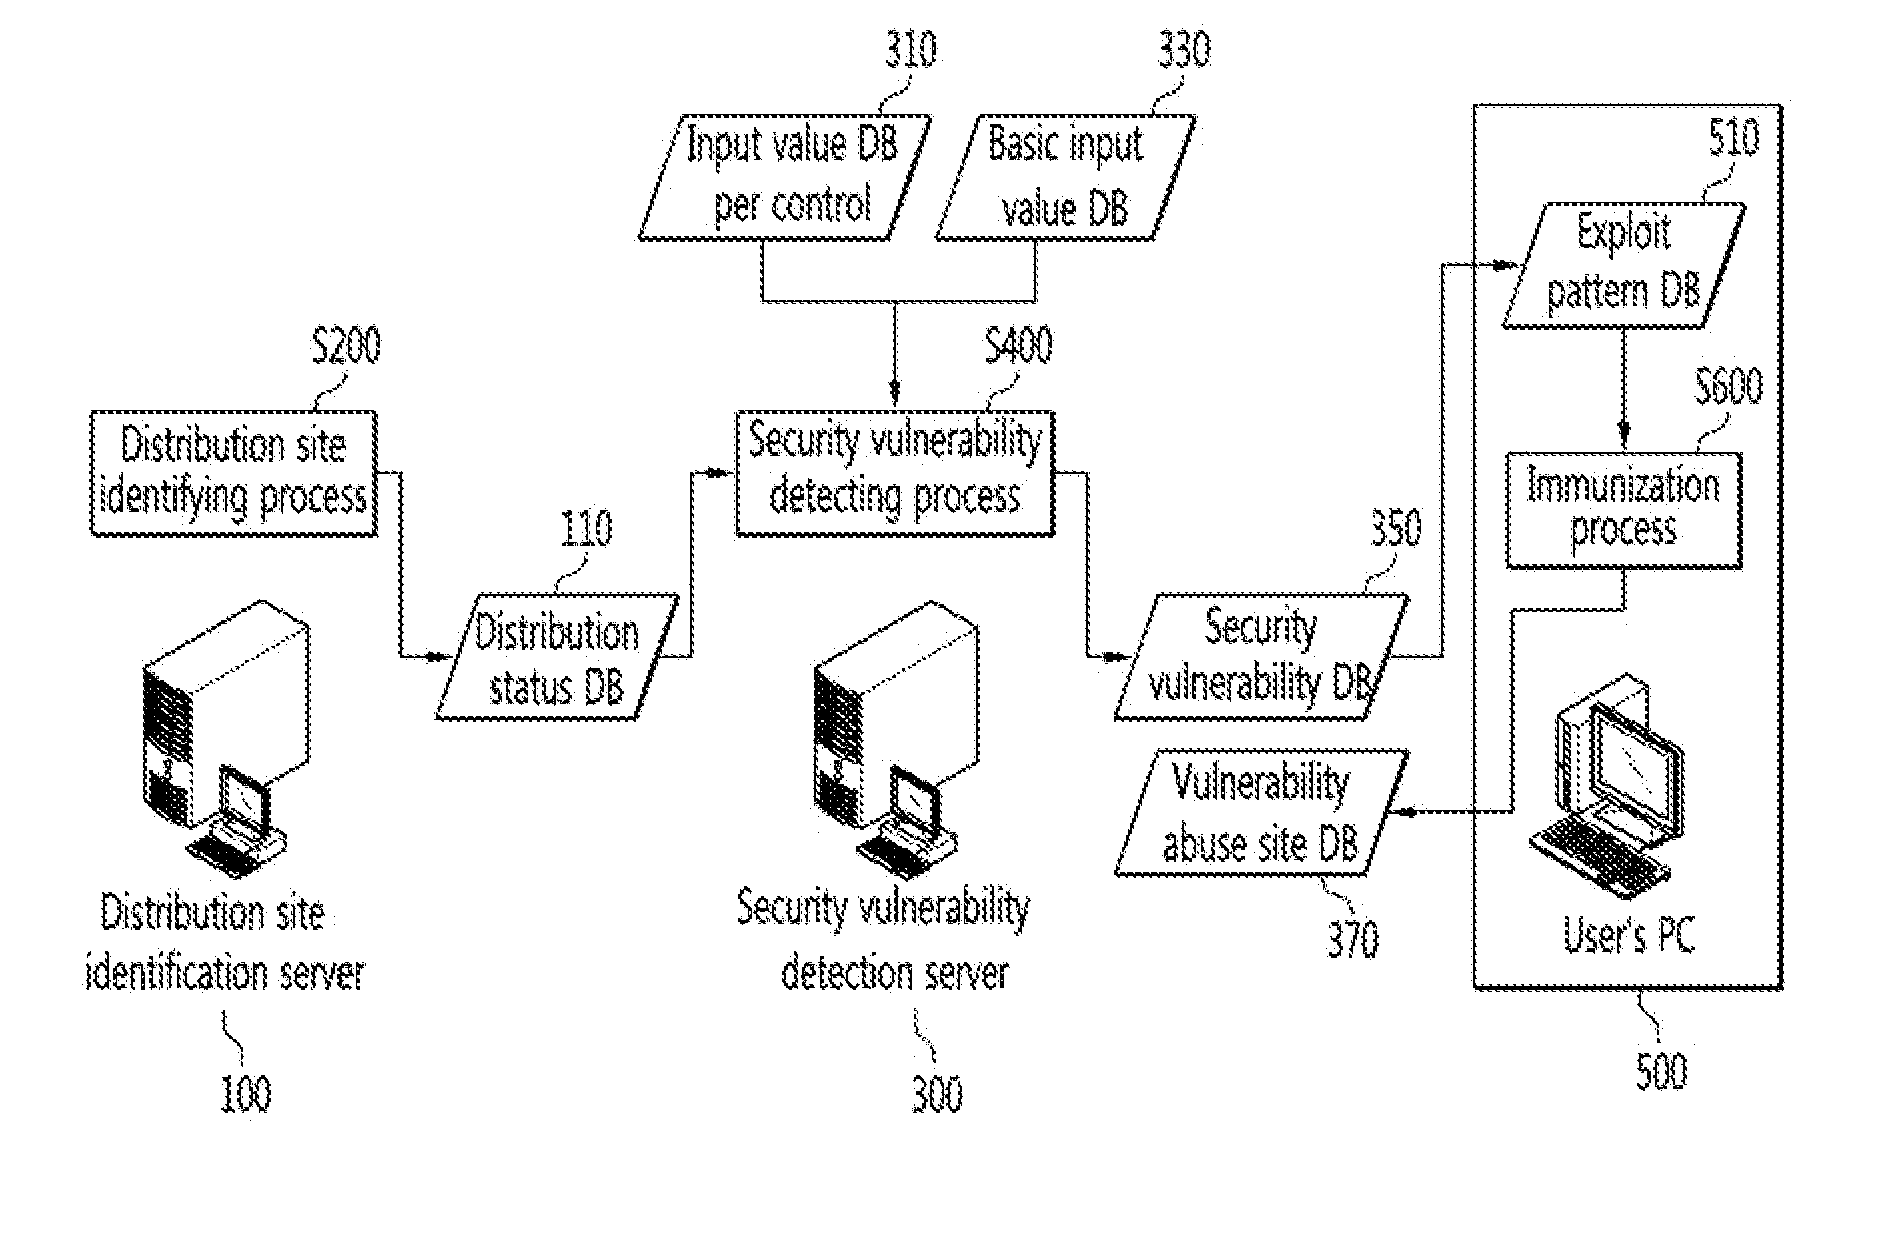 Methods of identifying activex control distribution site, detecting security vulnerability in activex control and immunizing the same